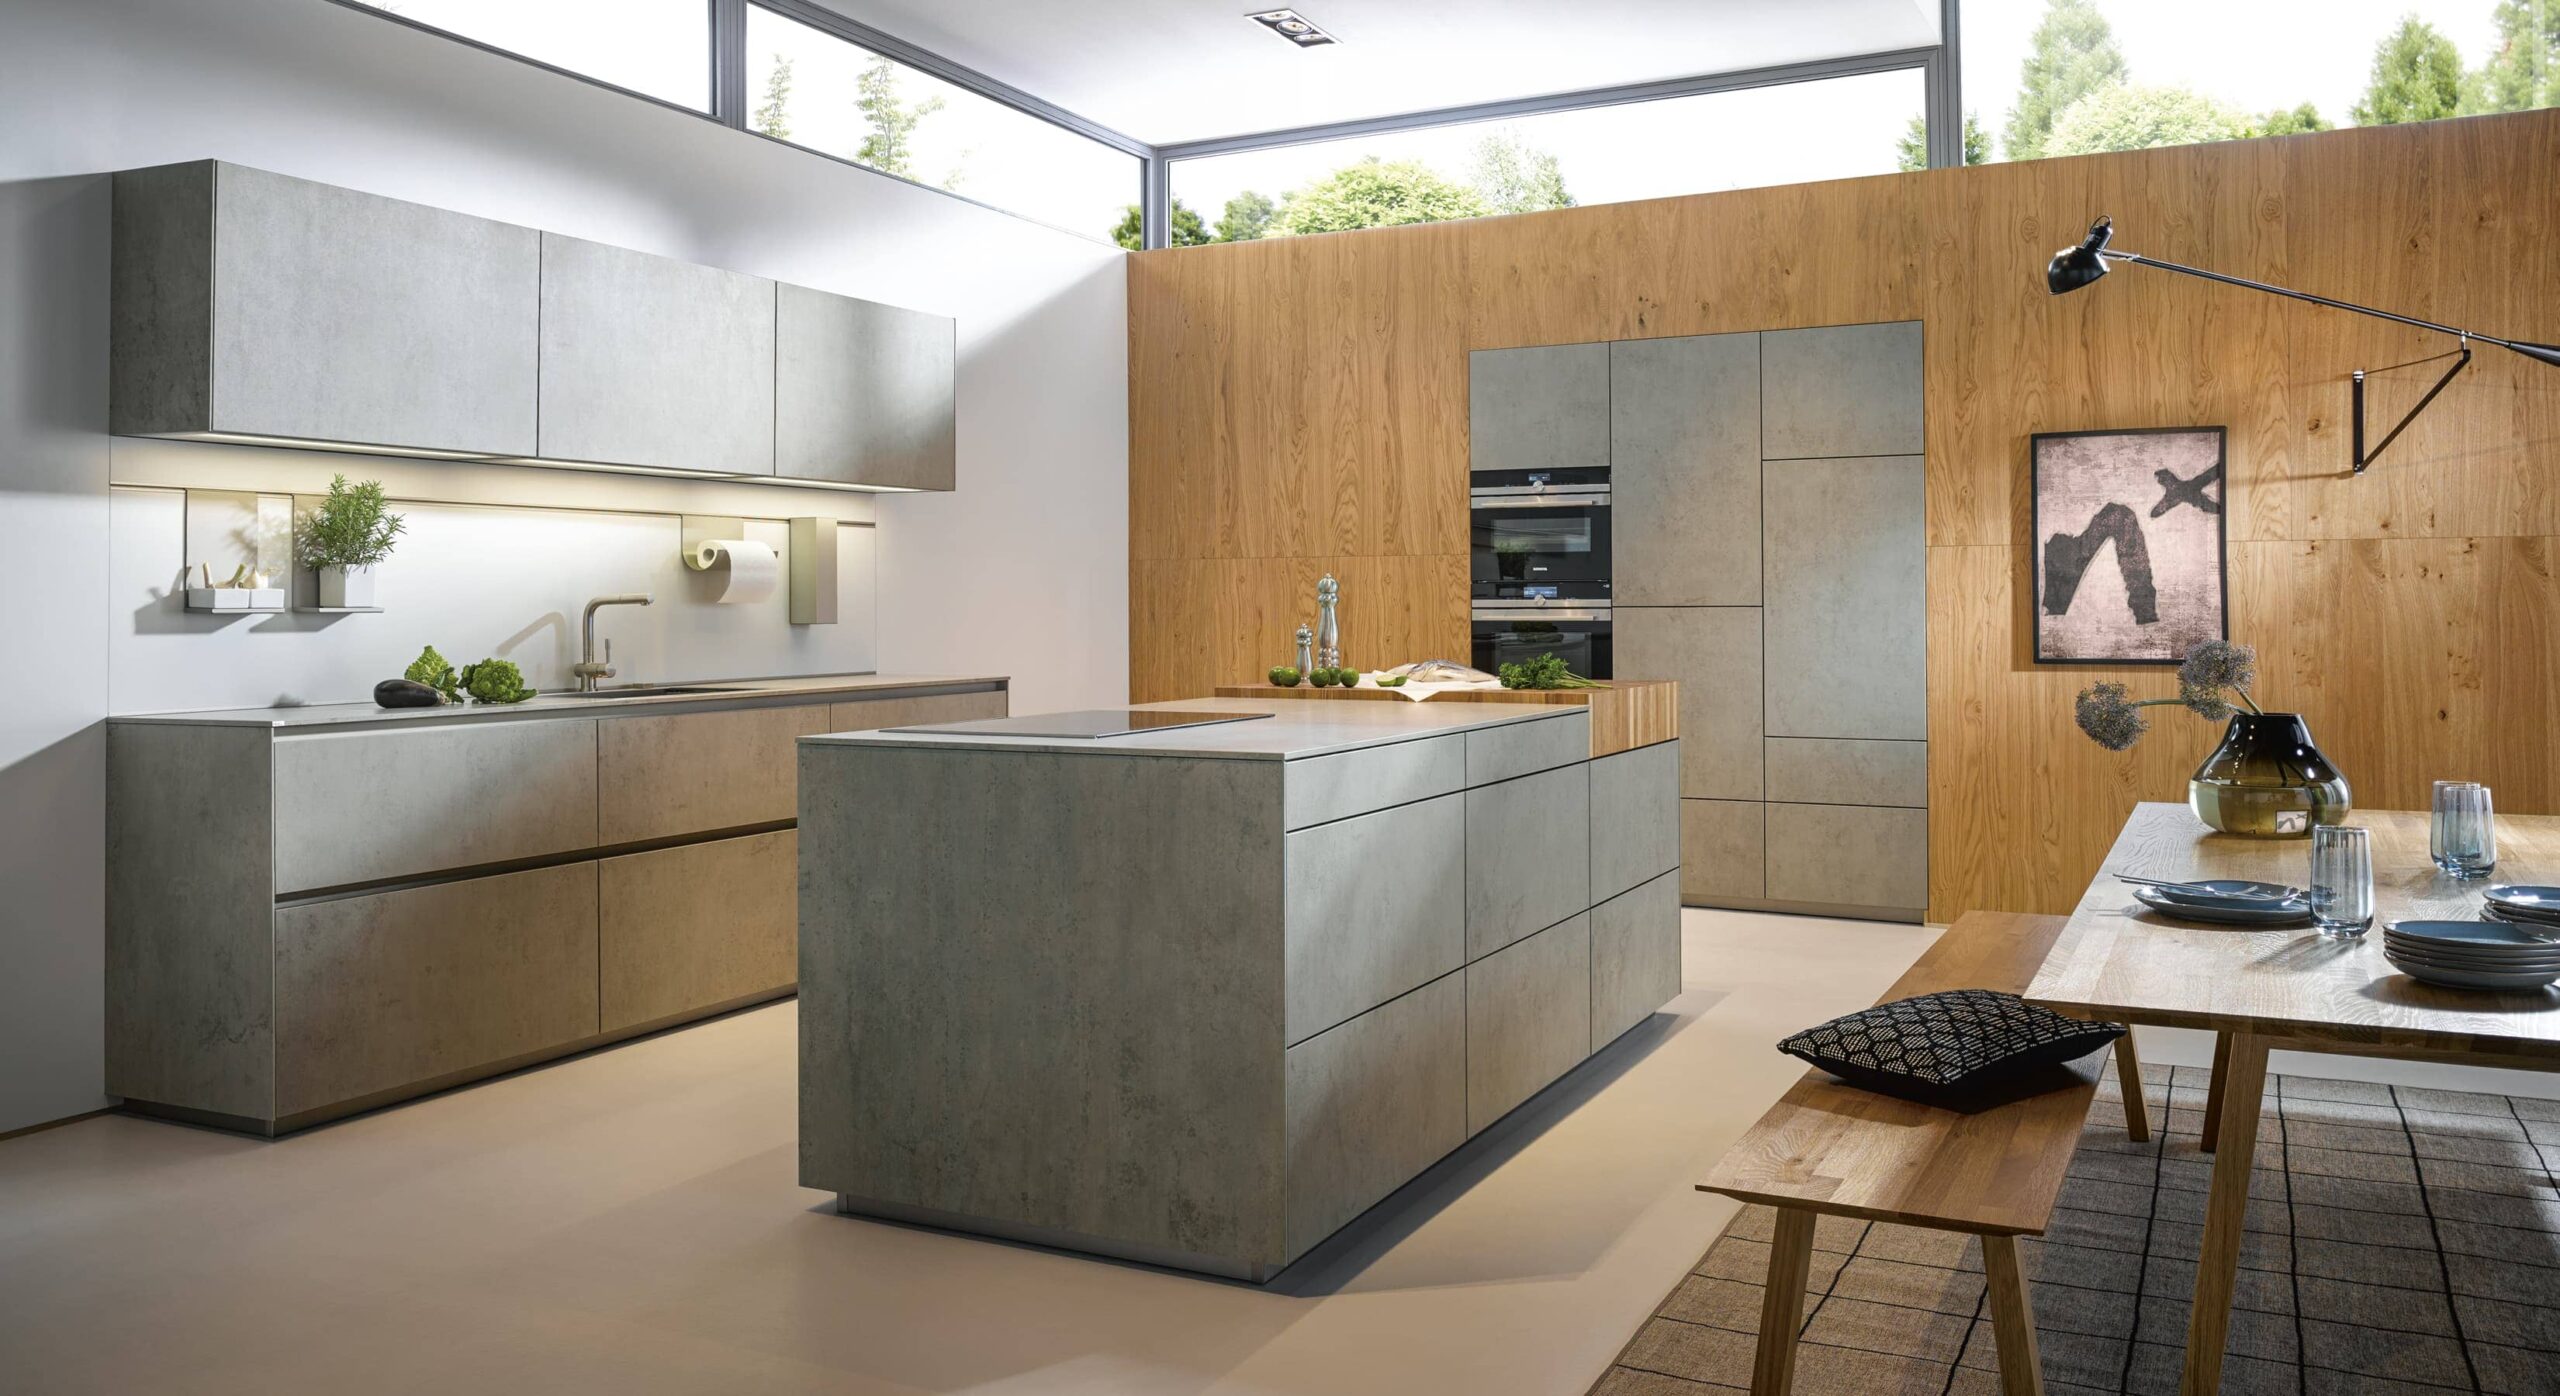 Contemporary cement and wood kitchen concept